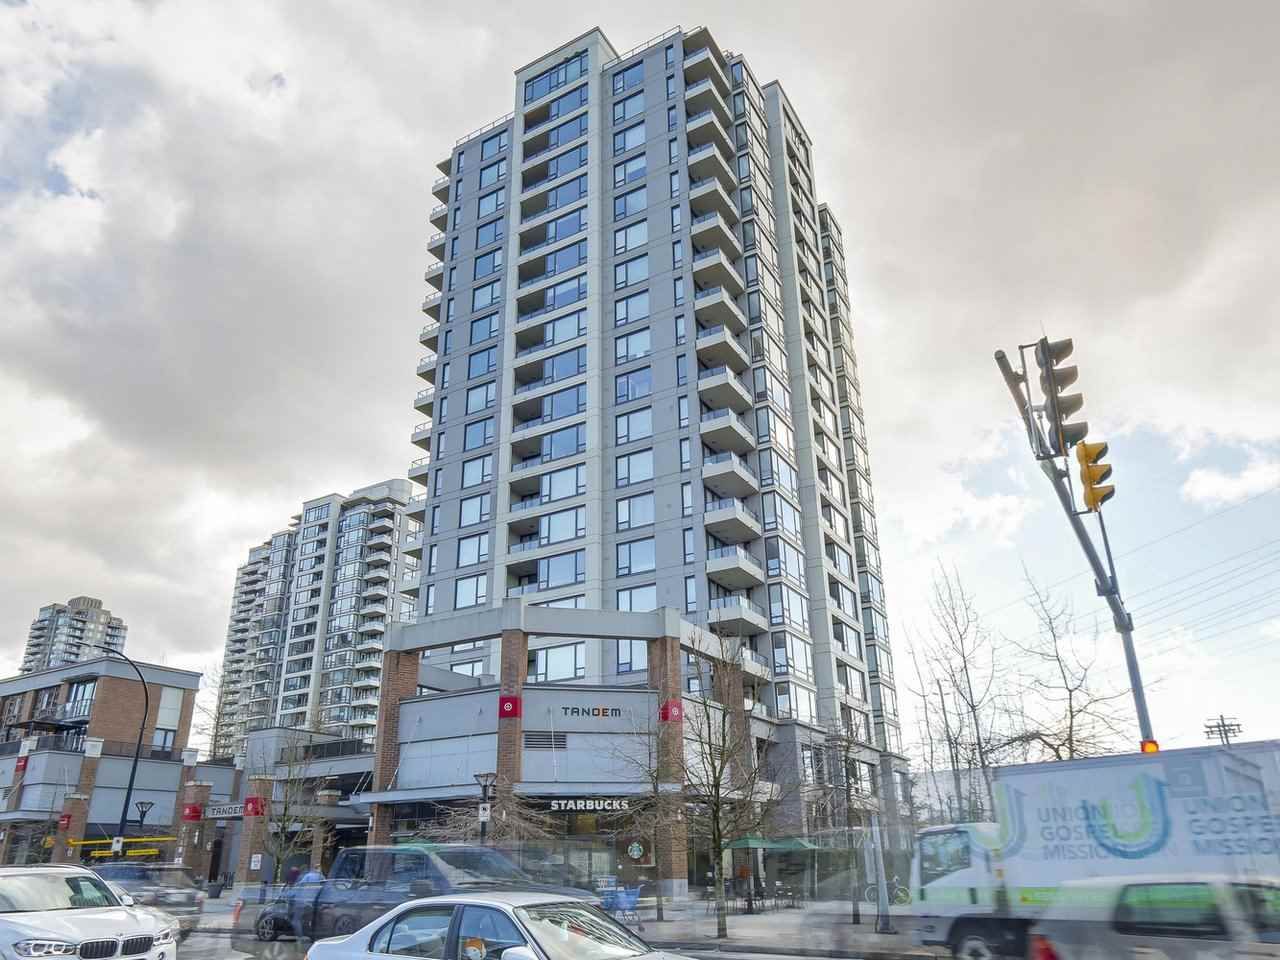 Main Photo: 1607 4118 DAWSON Street in Burnaby: Brentwood Park Condo for sale (Burnaby North)  : MLS®# R2246789